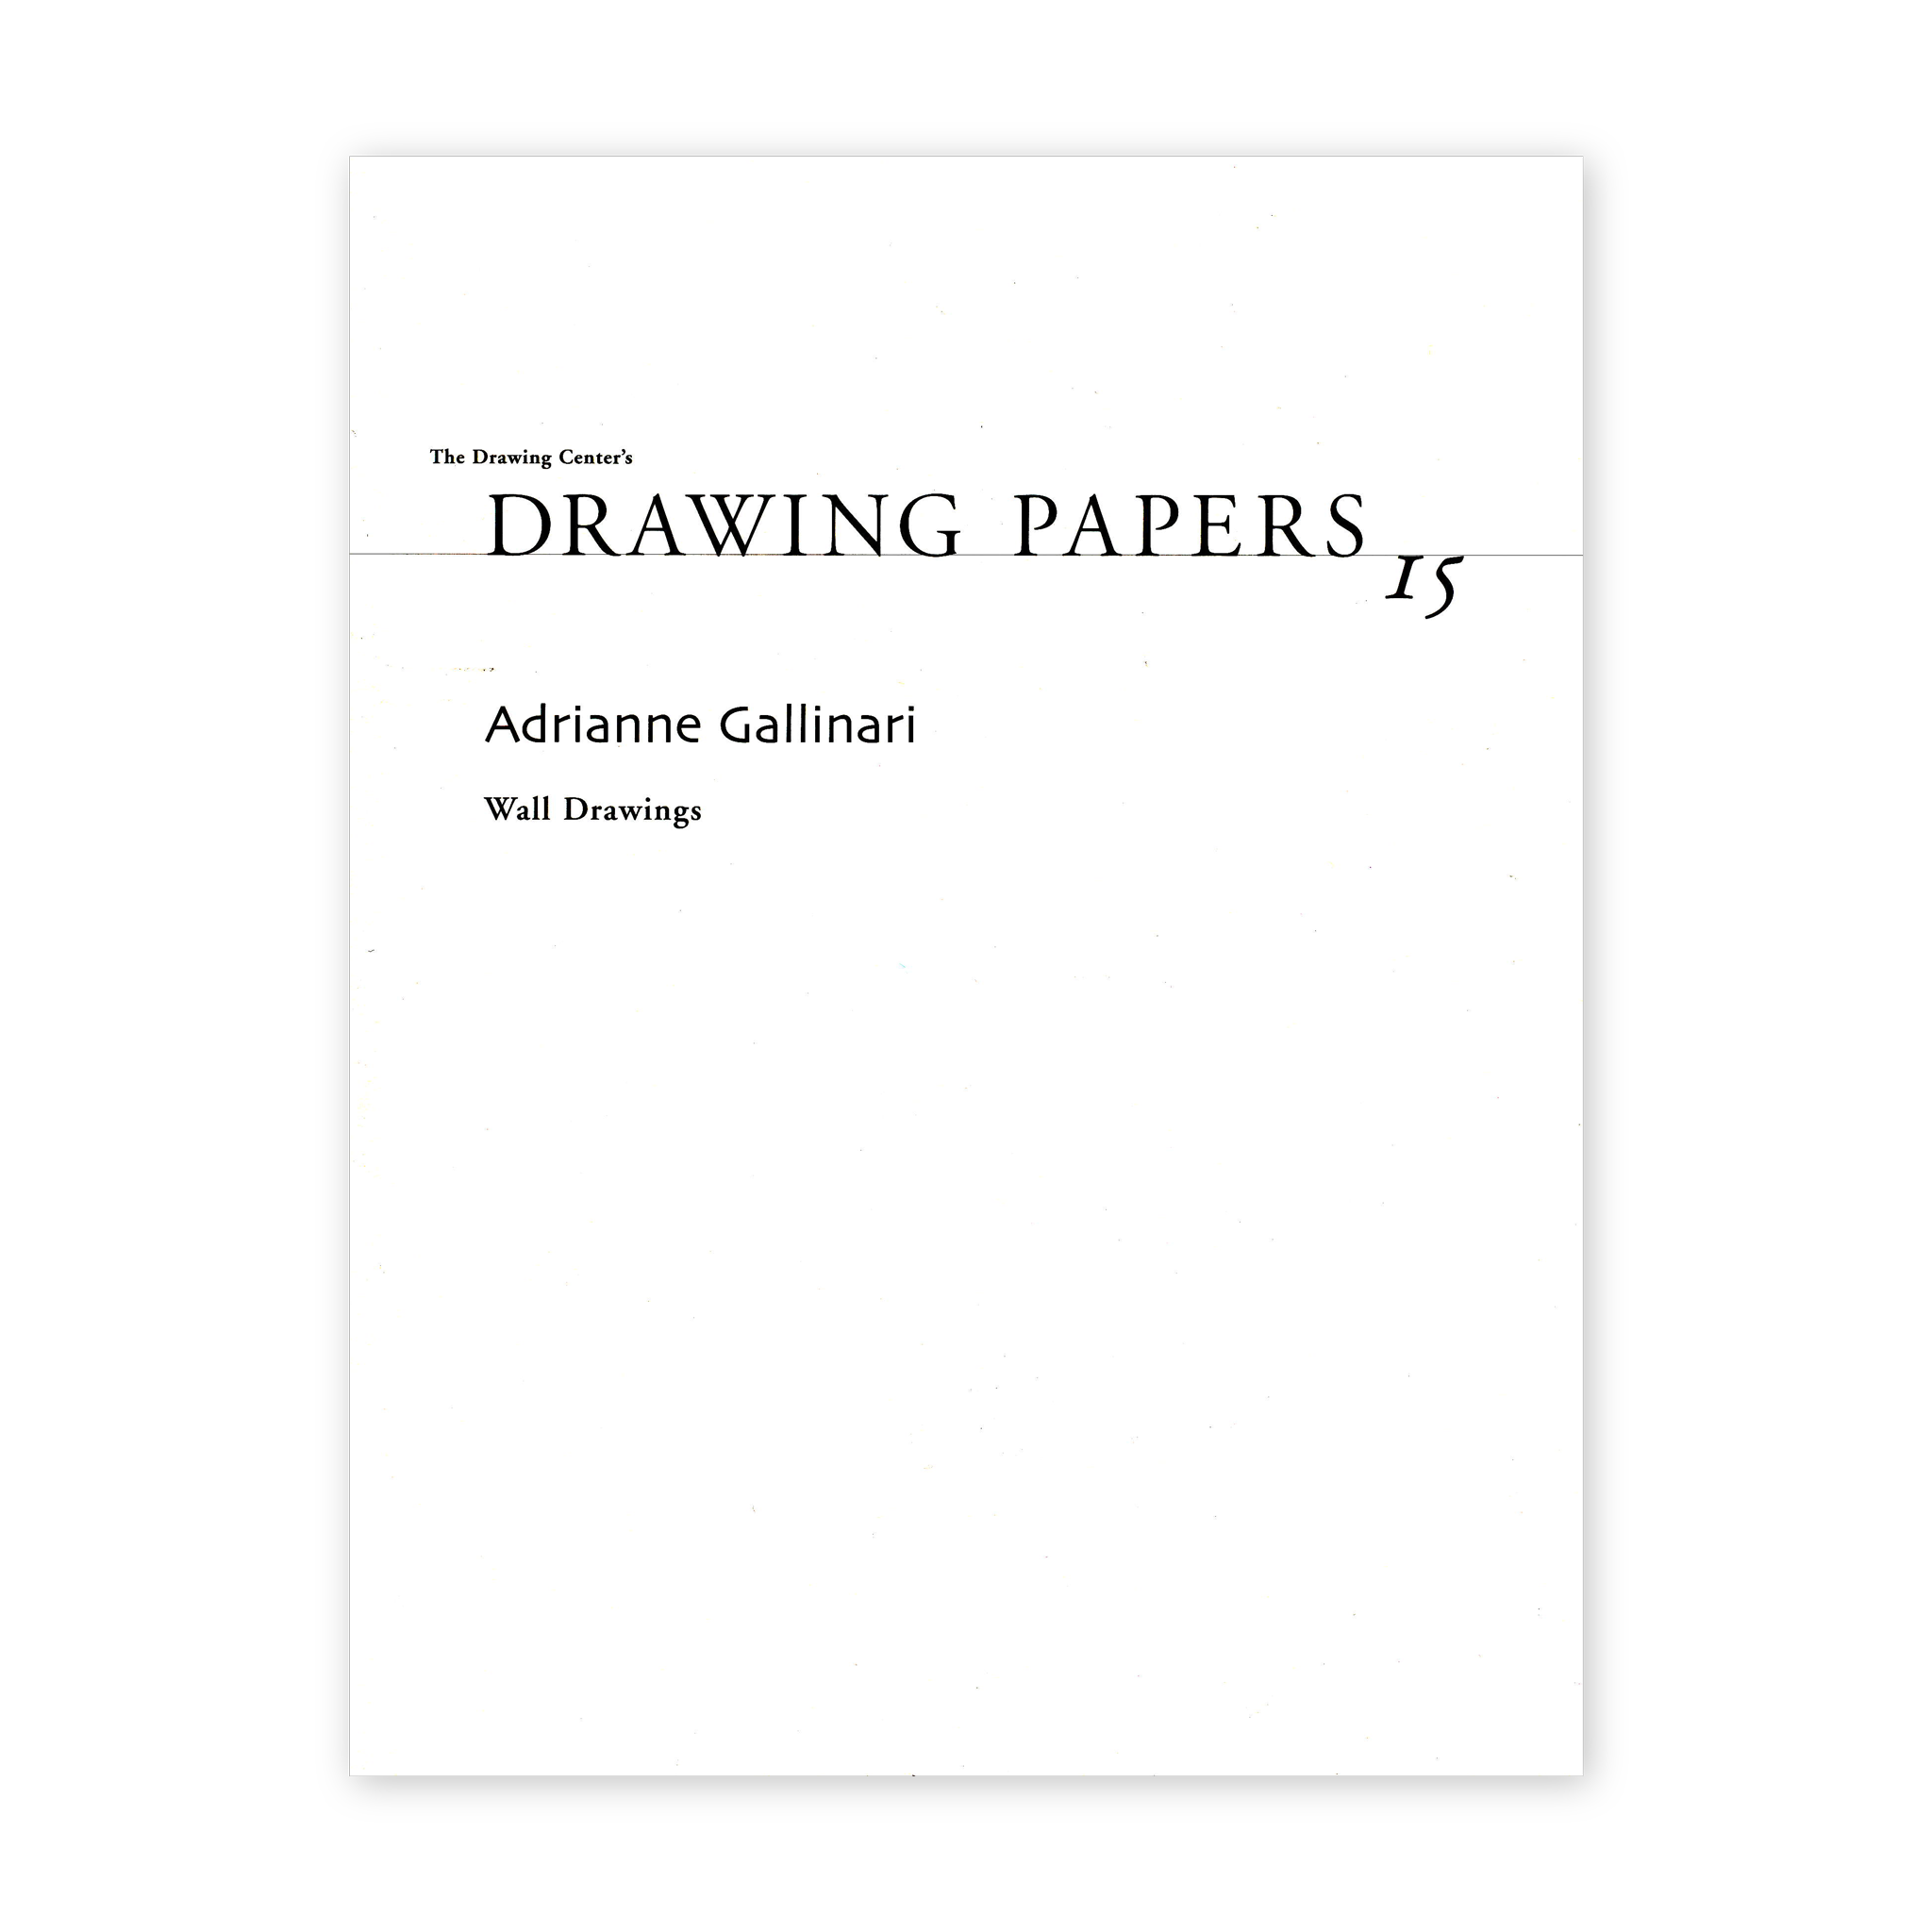 Front cover for "Adrianne Gallinari: Wall Drawings"